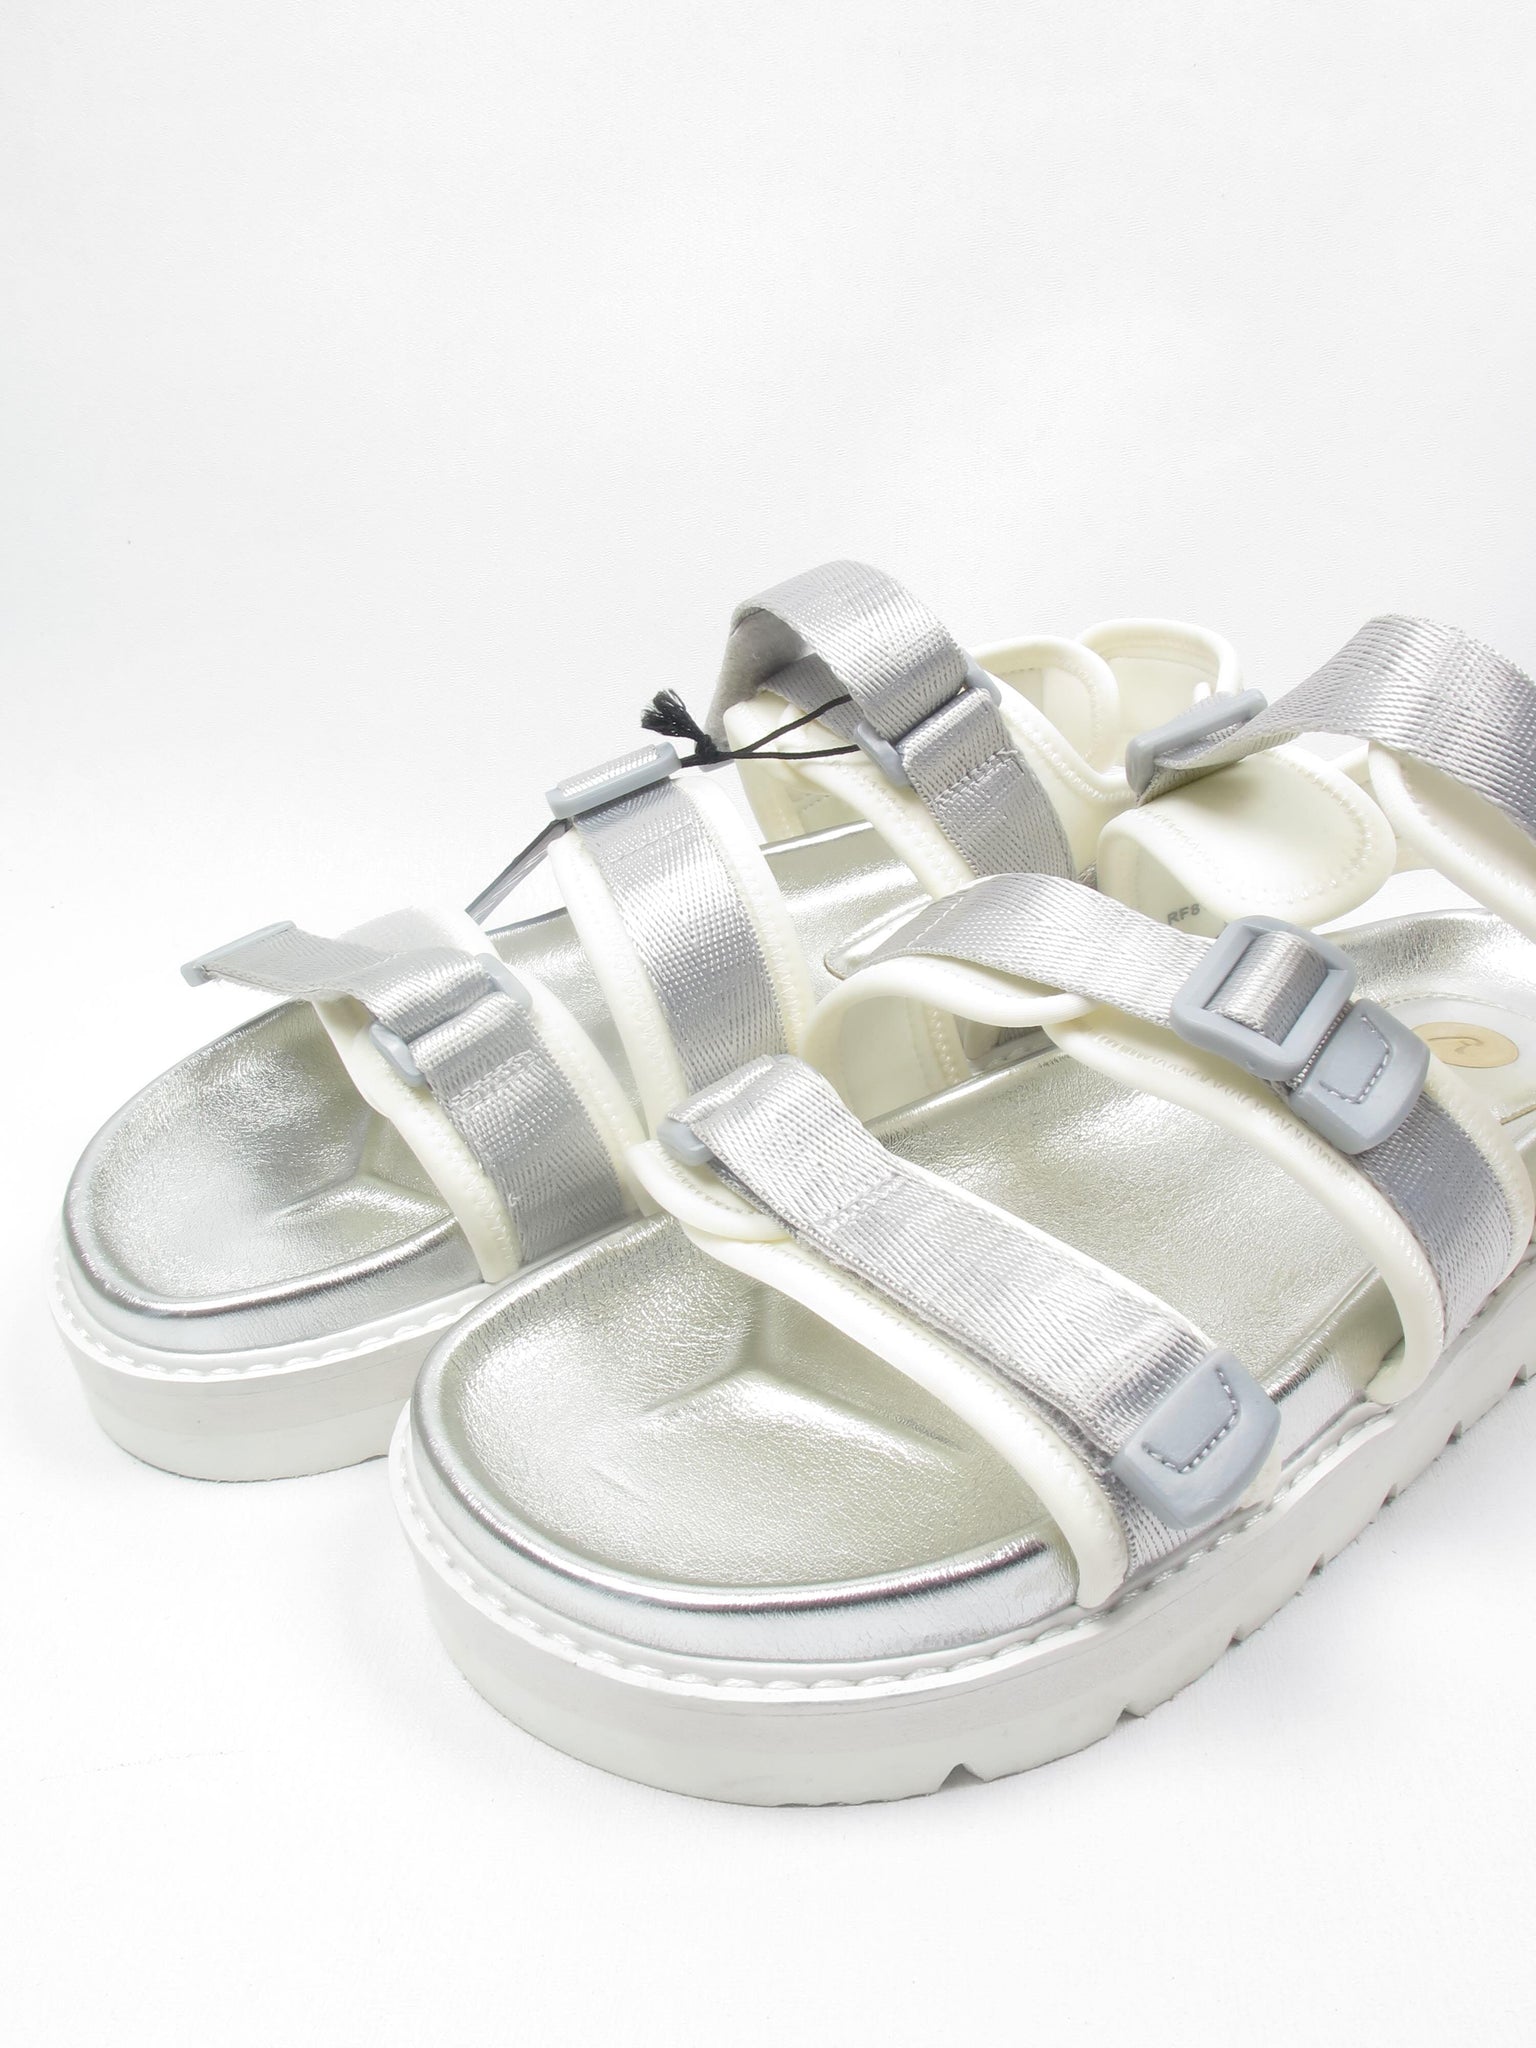 Women's Replay Silver Flatform Sandals 39/6 - The Harlequin